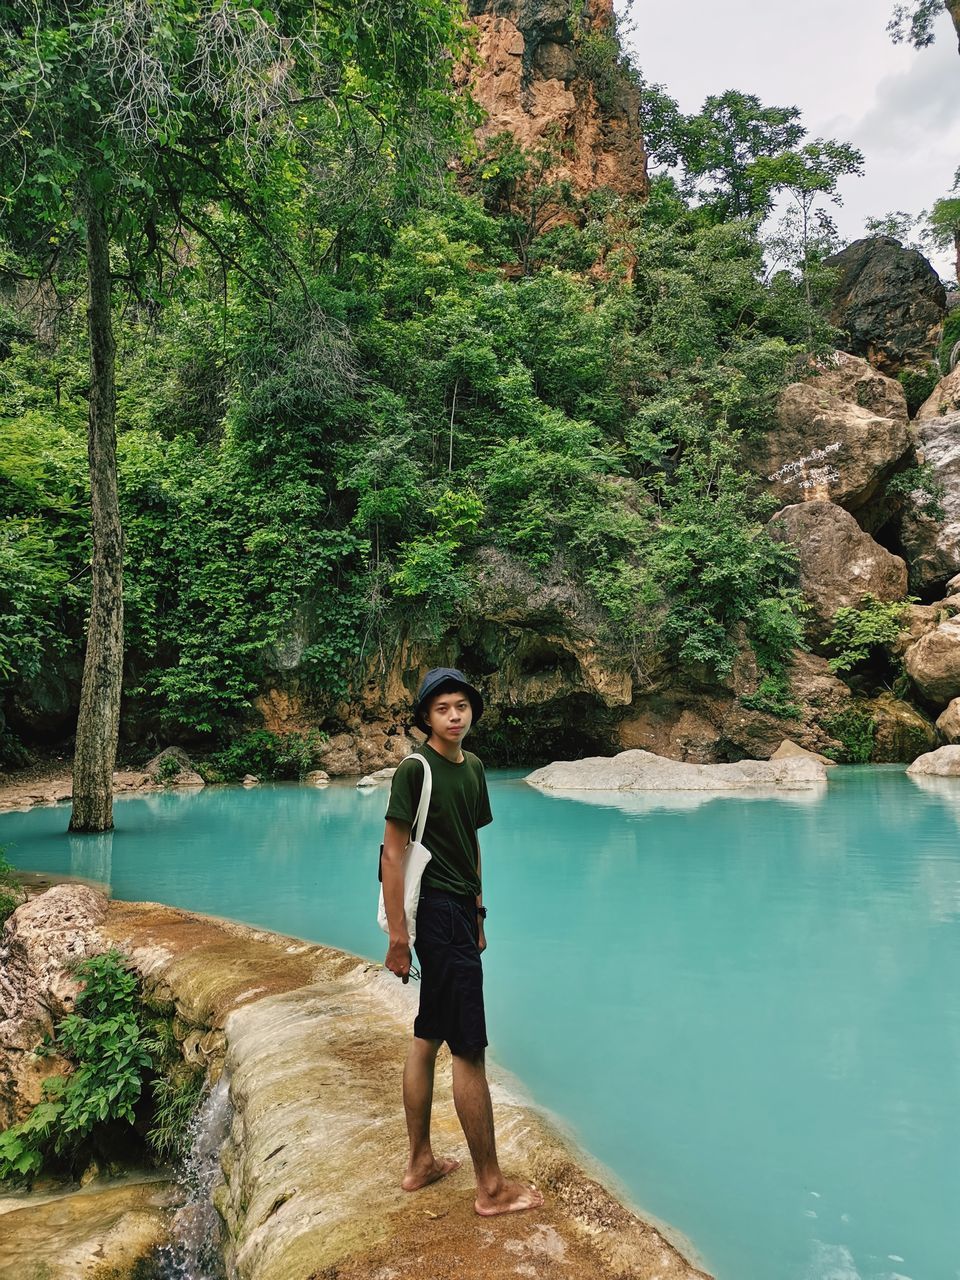 water, tree, one person, plant, nature, full length, leisure activity, beauty in nature, vacation, adult, lifestyles, standing, rock, young adult, trip, scenics - nature, holiday, tranquility, green, day, forest, land, casual clothing, travel, tranquil scene, travel destinations, outdoors, non-urban scene, women, tourism, lake, mountain, clothing, men, body of water, idyllic, front view, relaxation, portrait, environment, fashion, tourist, looking, smiling